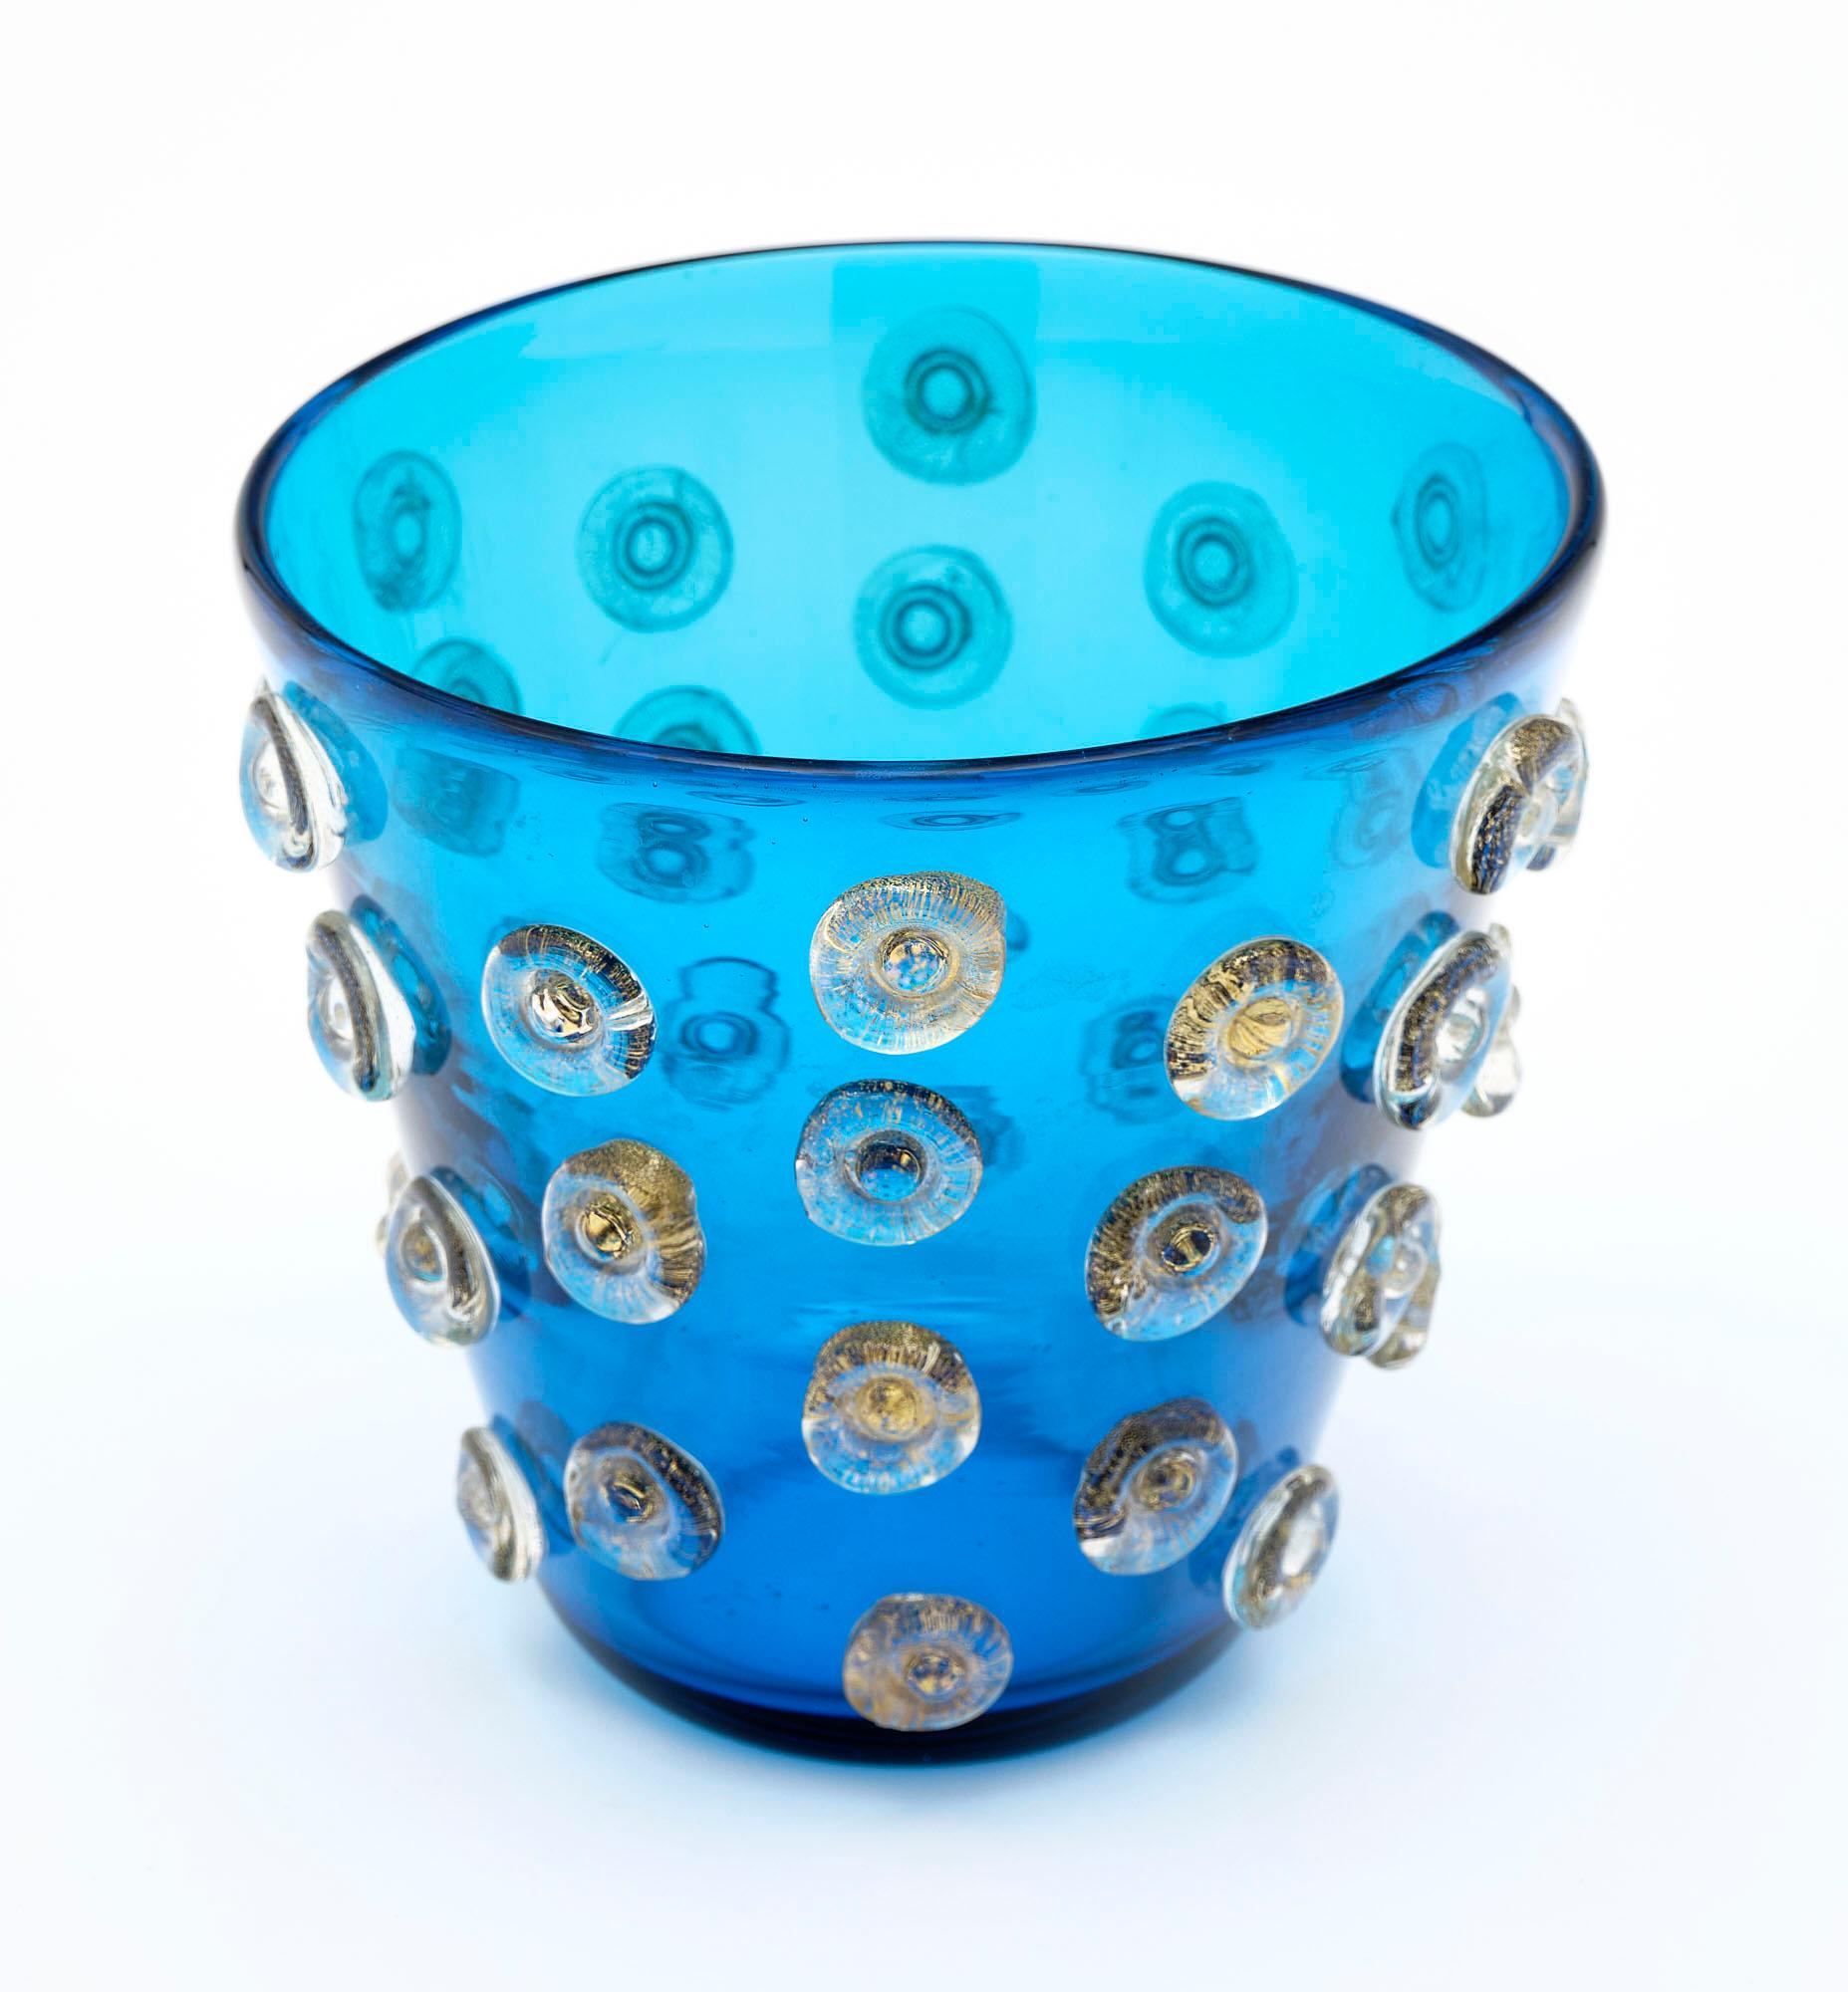 Vase from the island of Murano made of aqua blue hand-blown glass with 24 carat fused glass “buttons”.